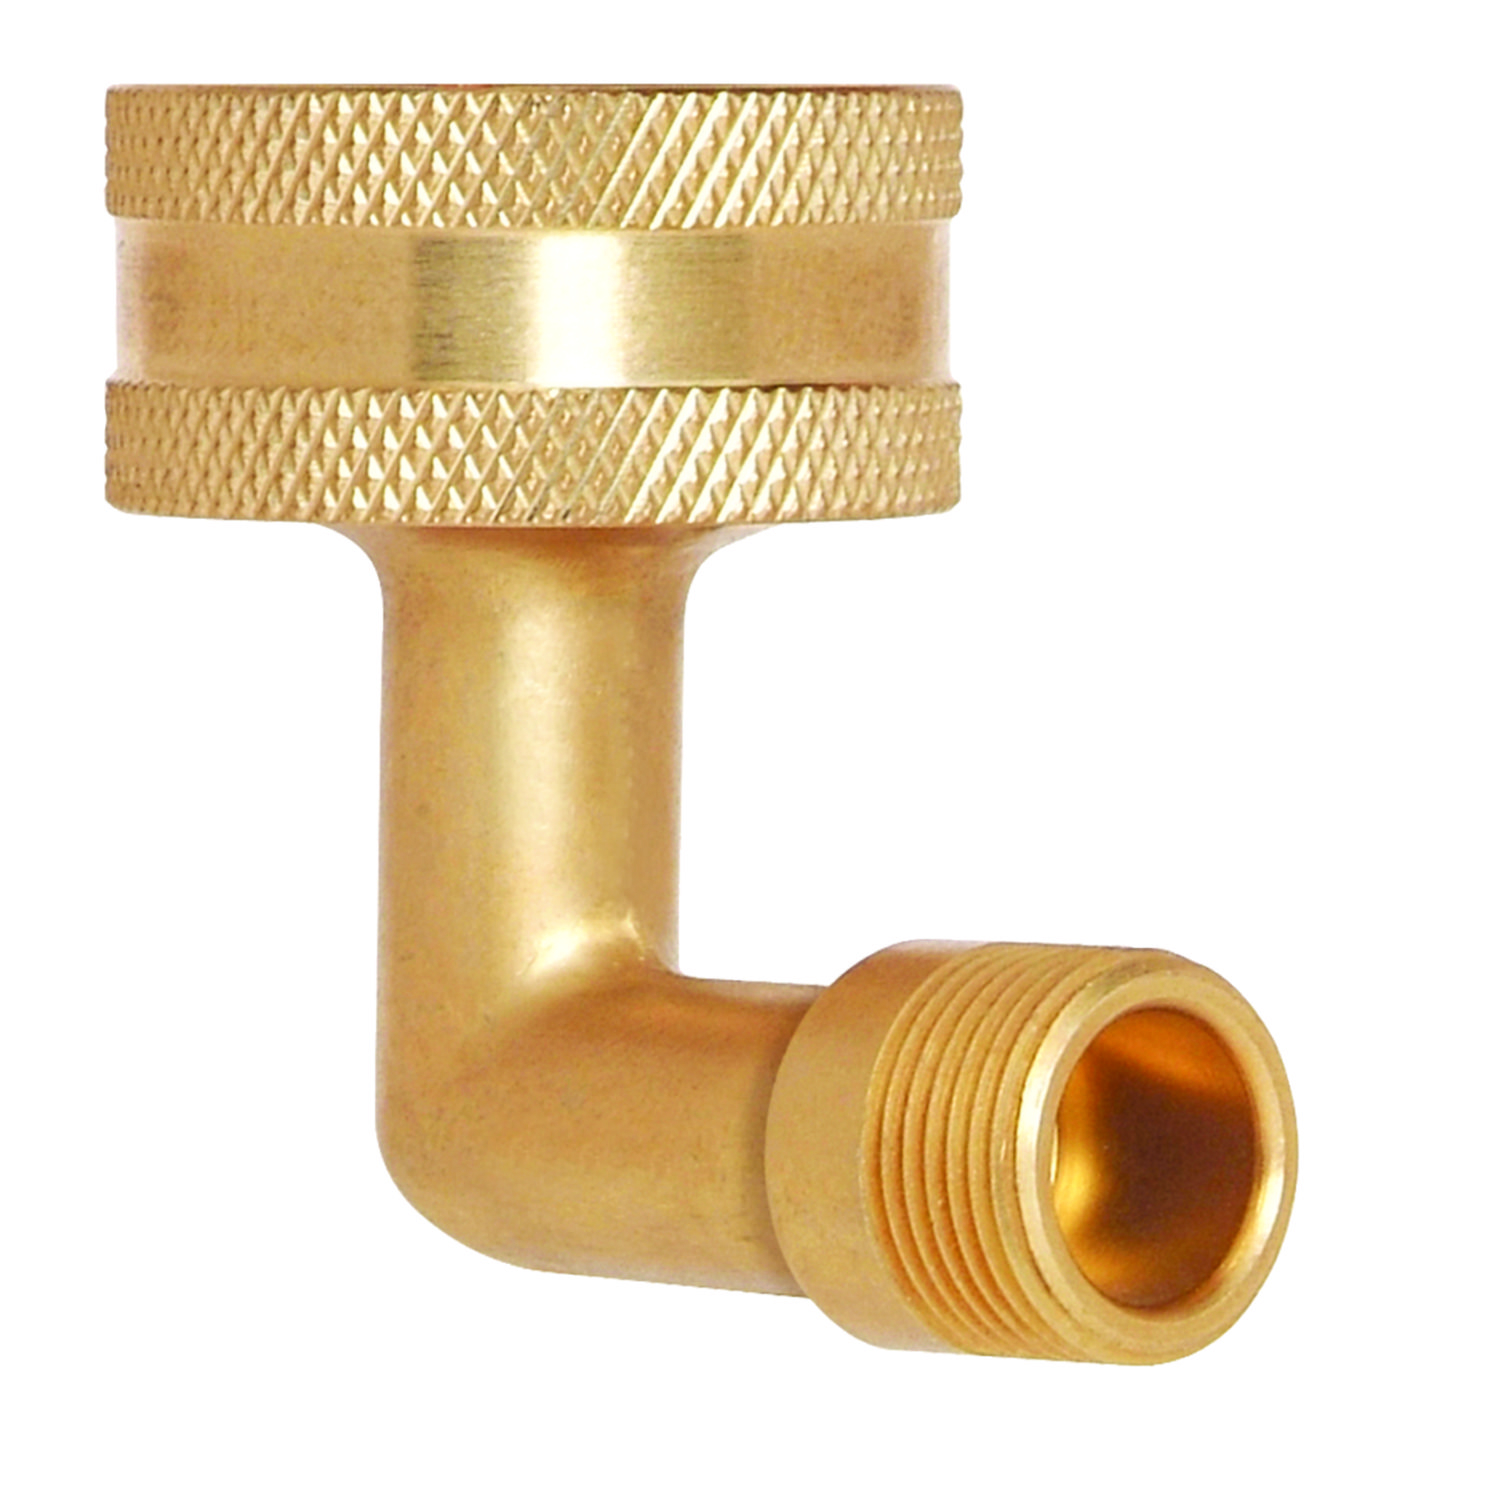 UPC 026613160207 product image for BrassCraft Compression x 3/4 in. Dia. FTH Brass Garden Hose with Washer | upcitemdb.com